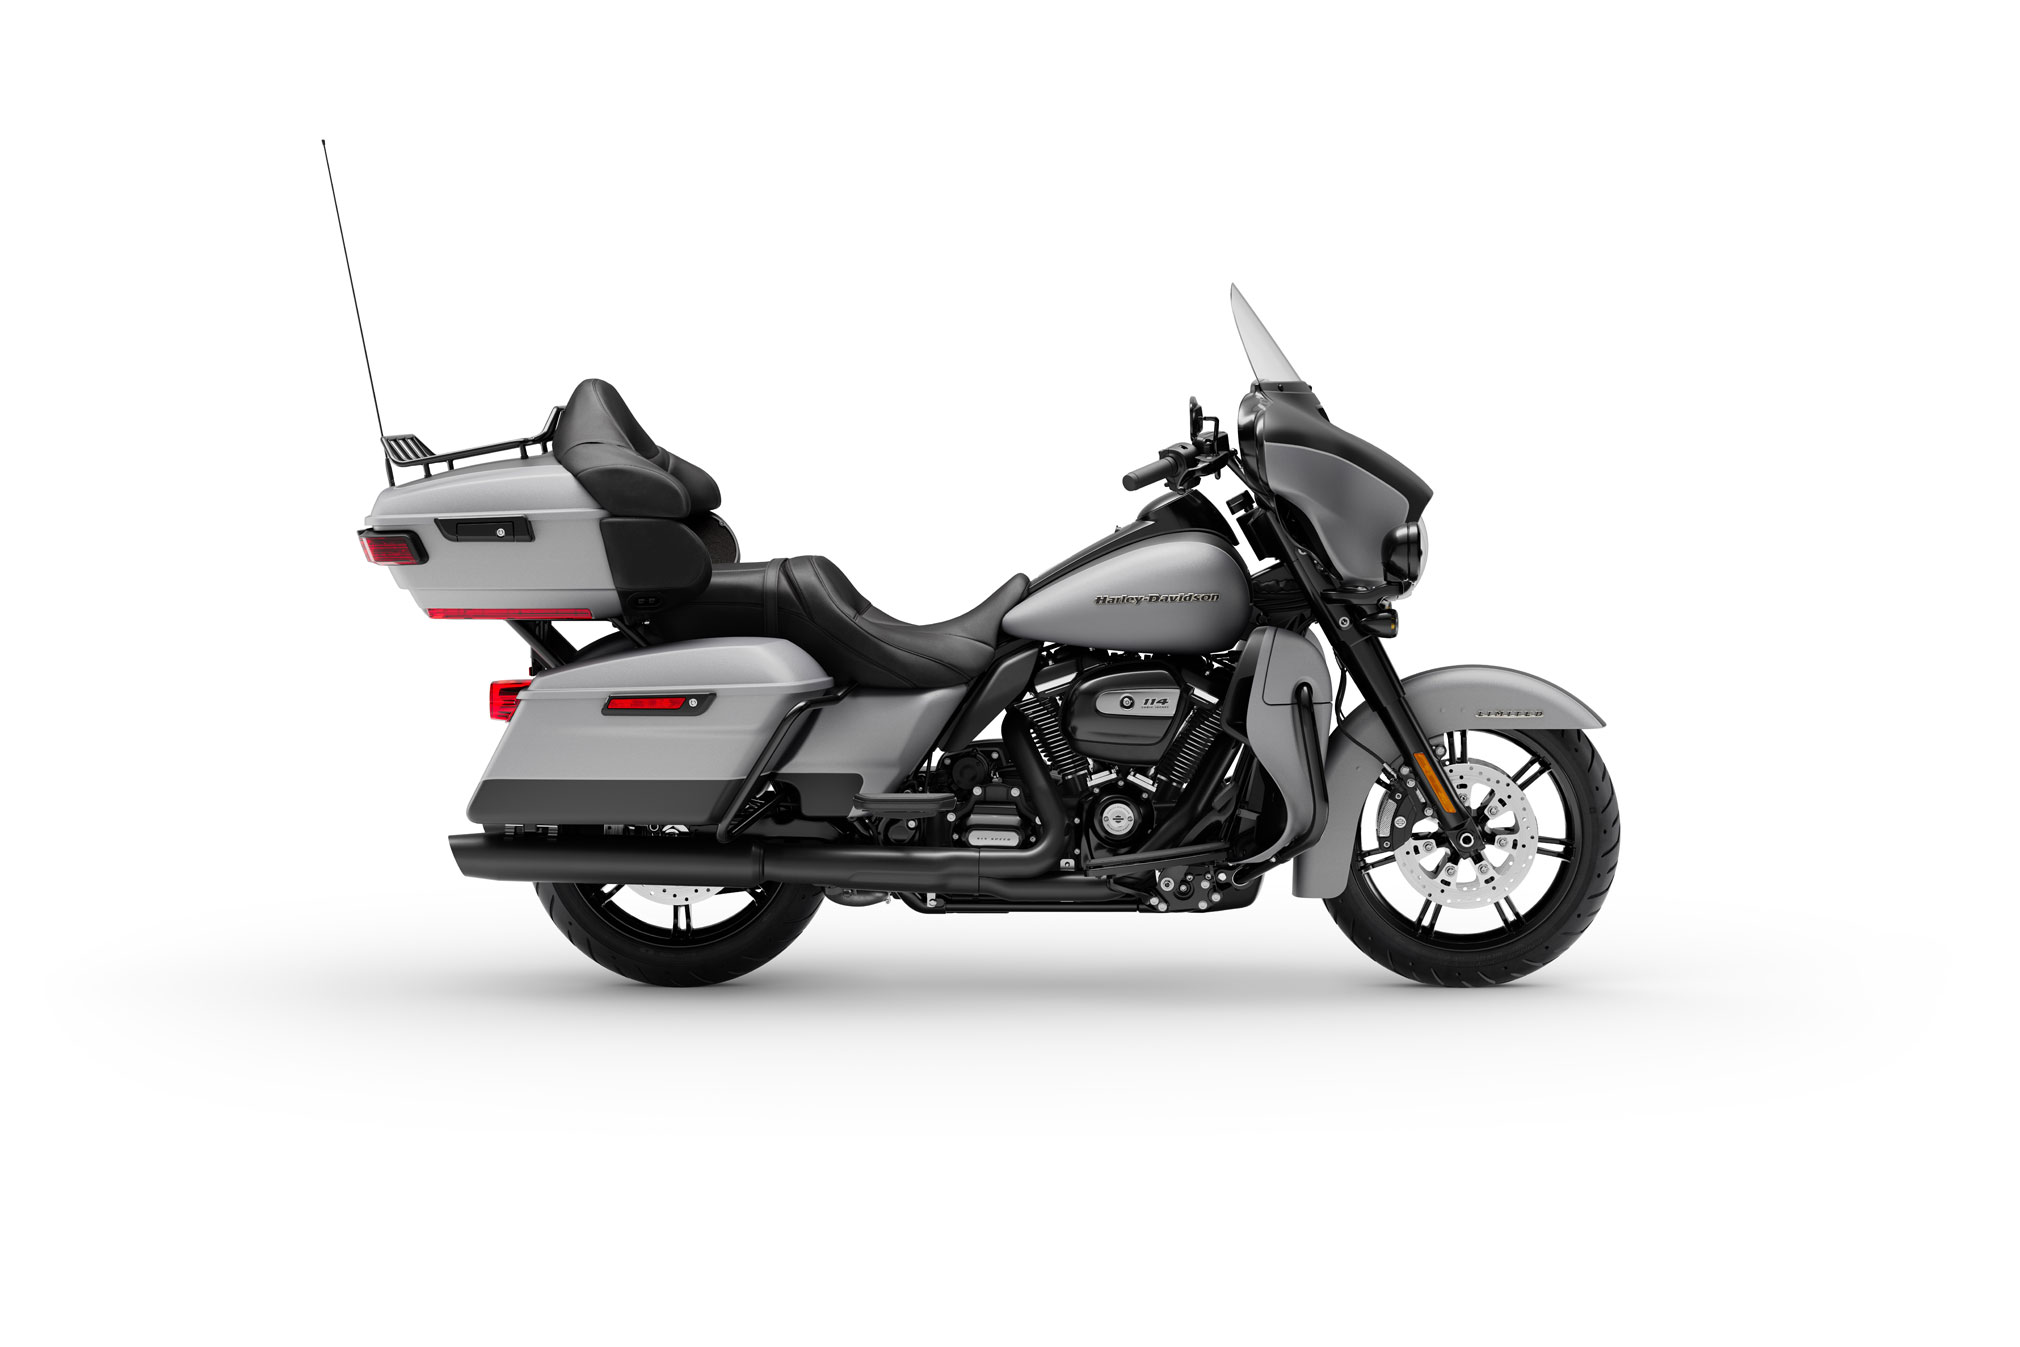  2020 Harley Davidson Ultra Limited Guide Total Motorcycle